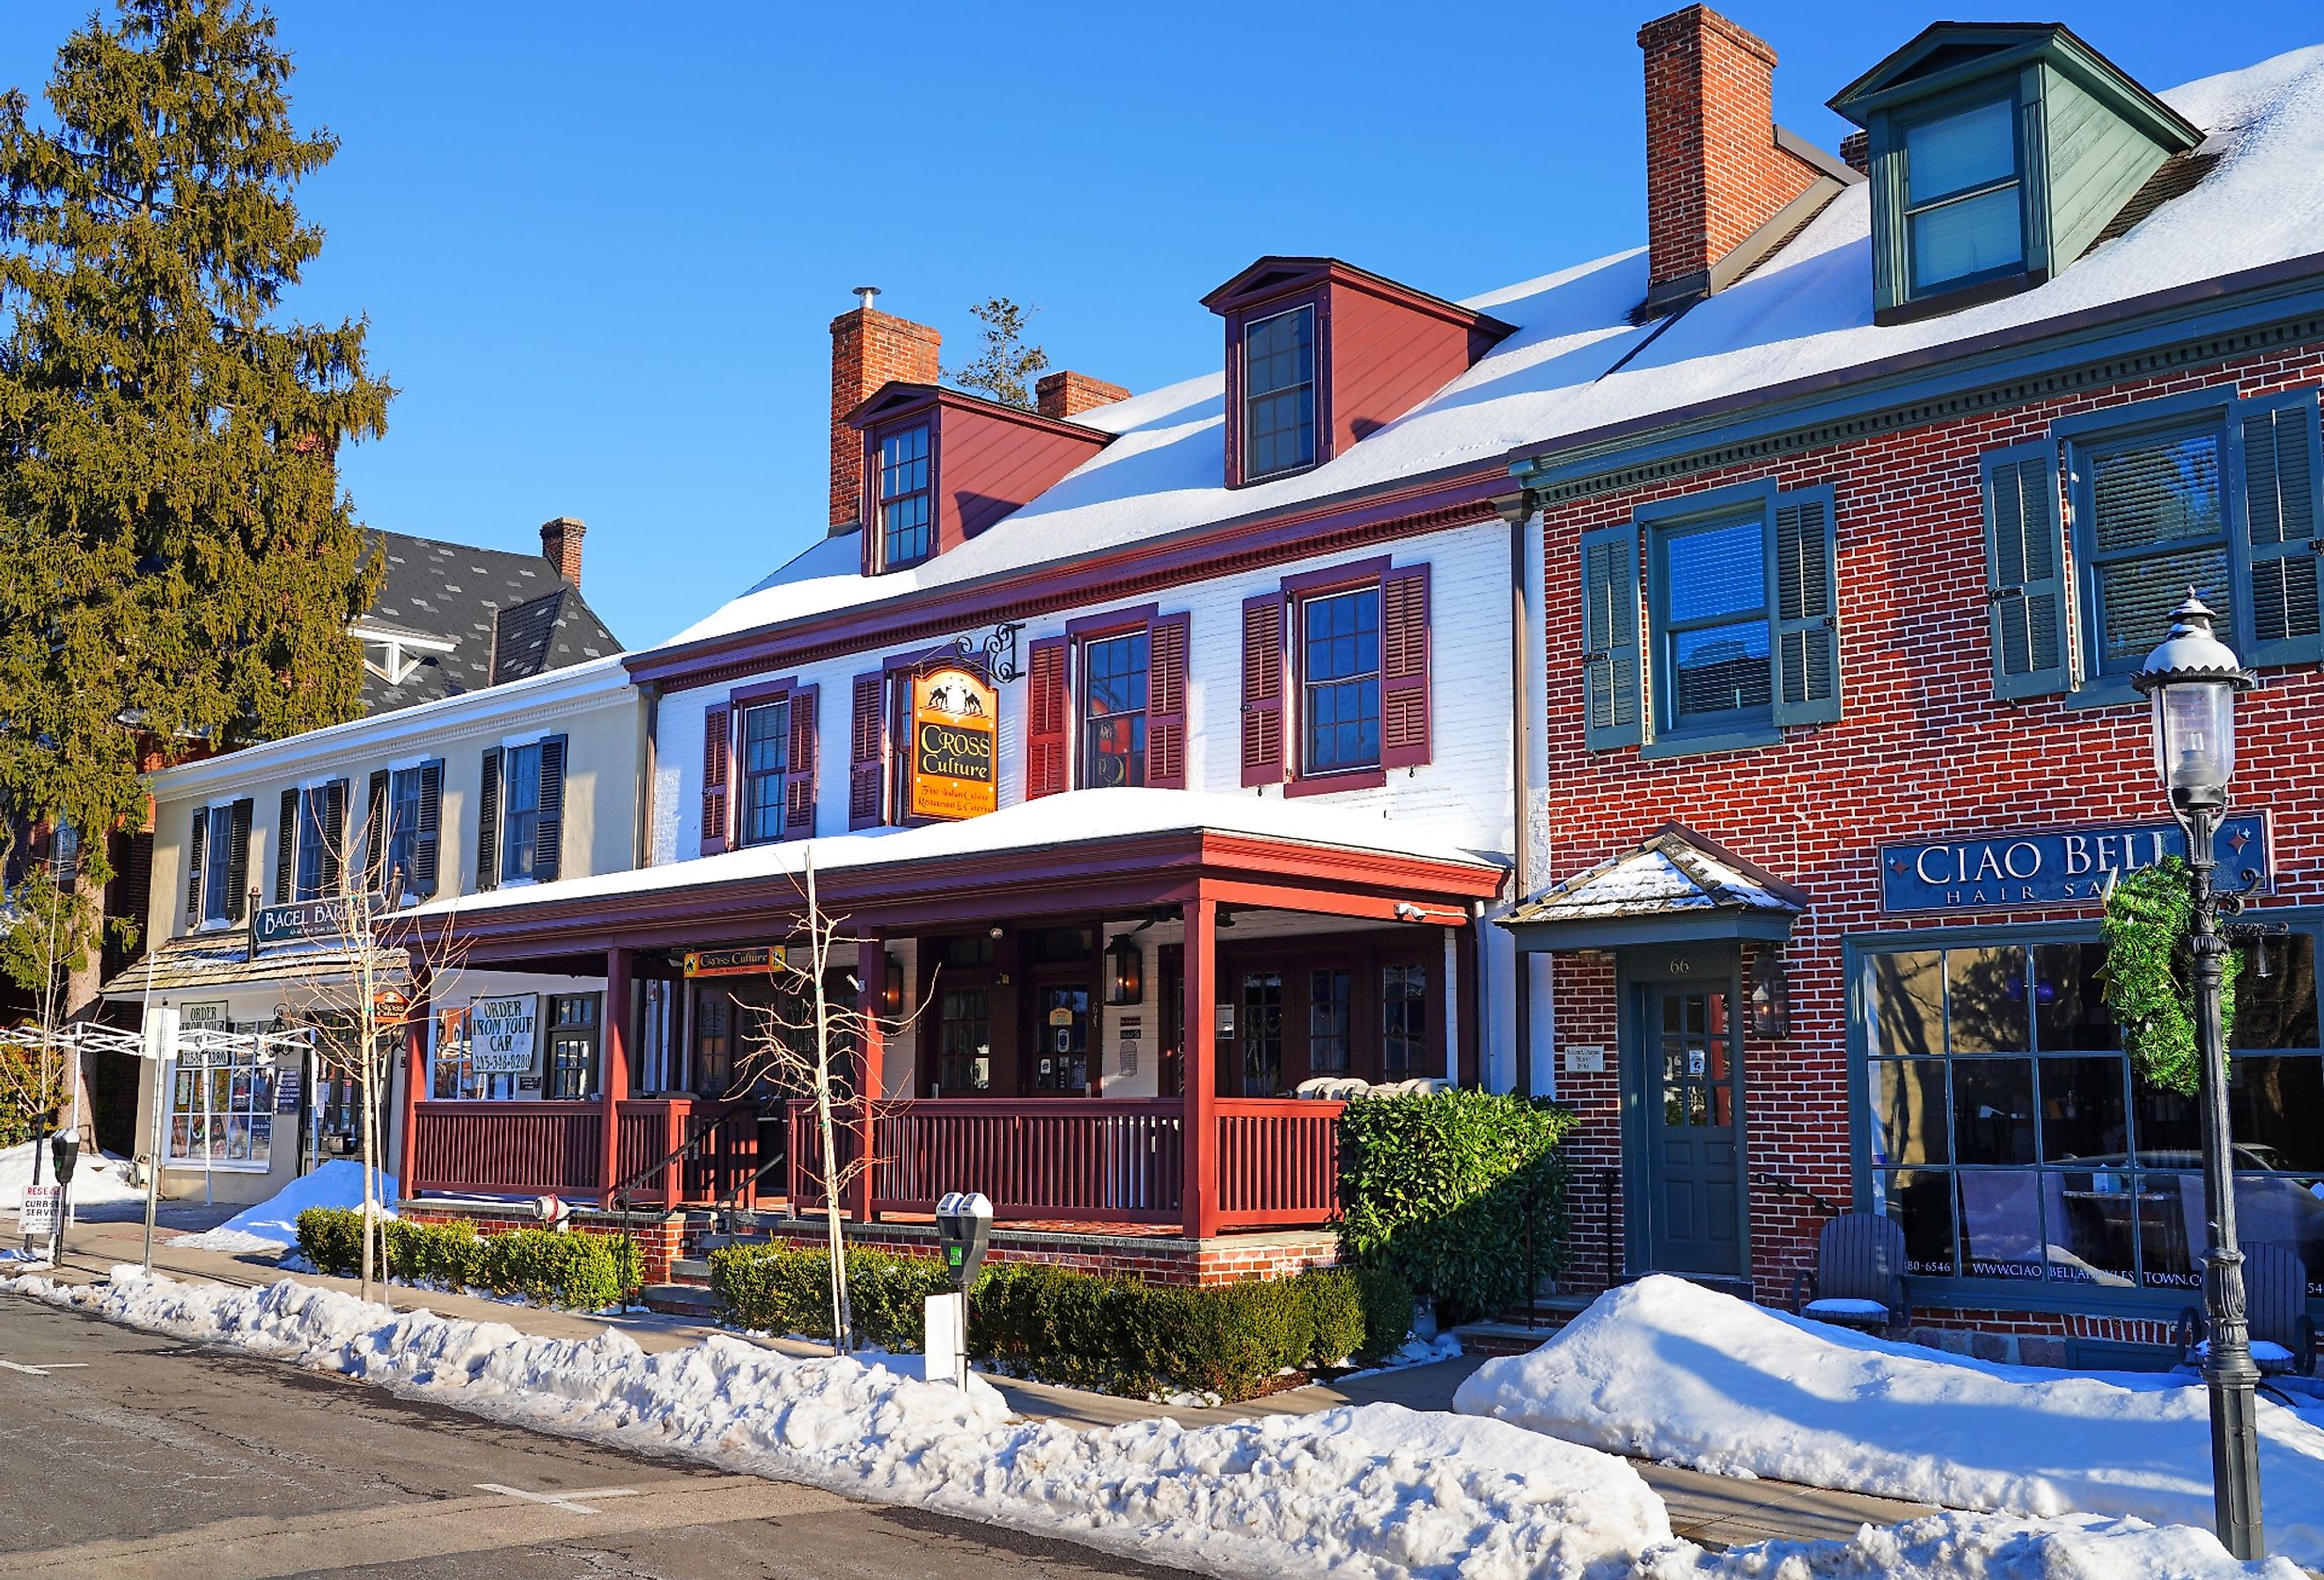 Winter view of downtown buildings in historic Doylestown, Bucks County, Pennsylvania. Image credit EQRoy via Shutterstock